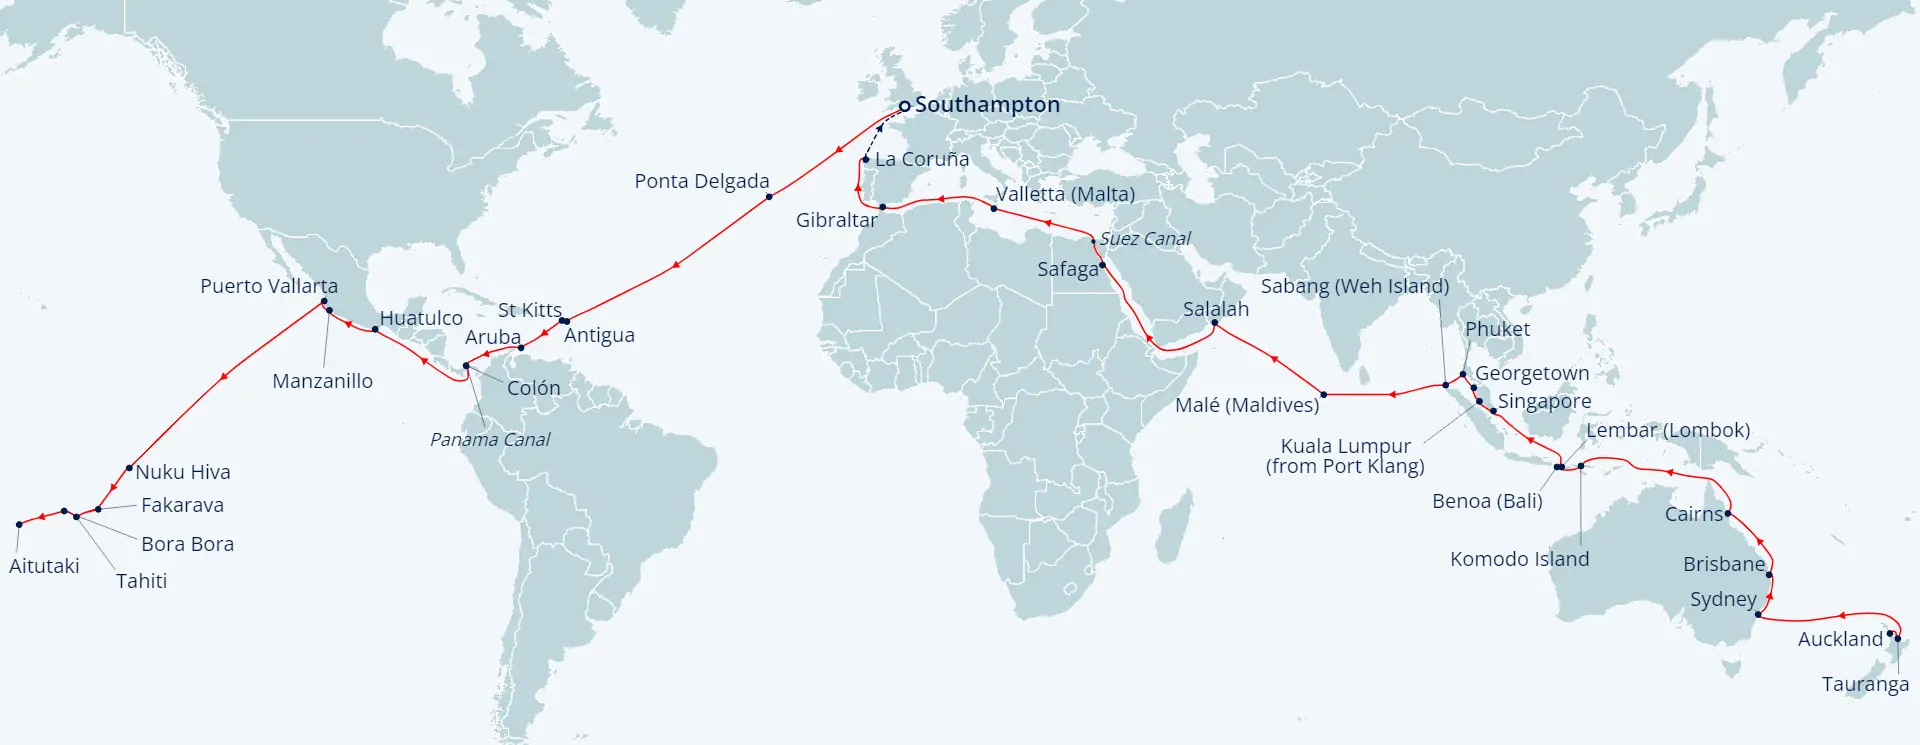 Route for the Fred. Olsen World Cruise in 2026